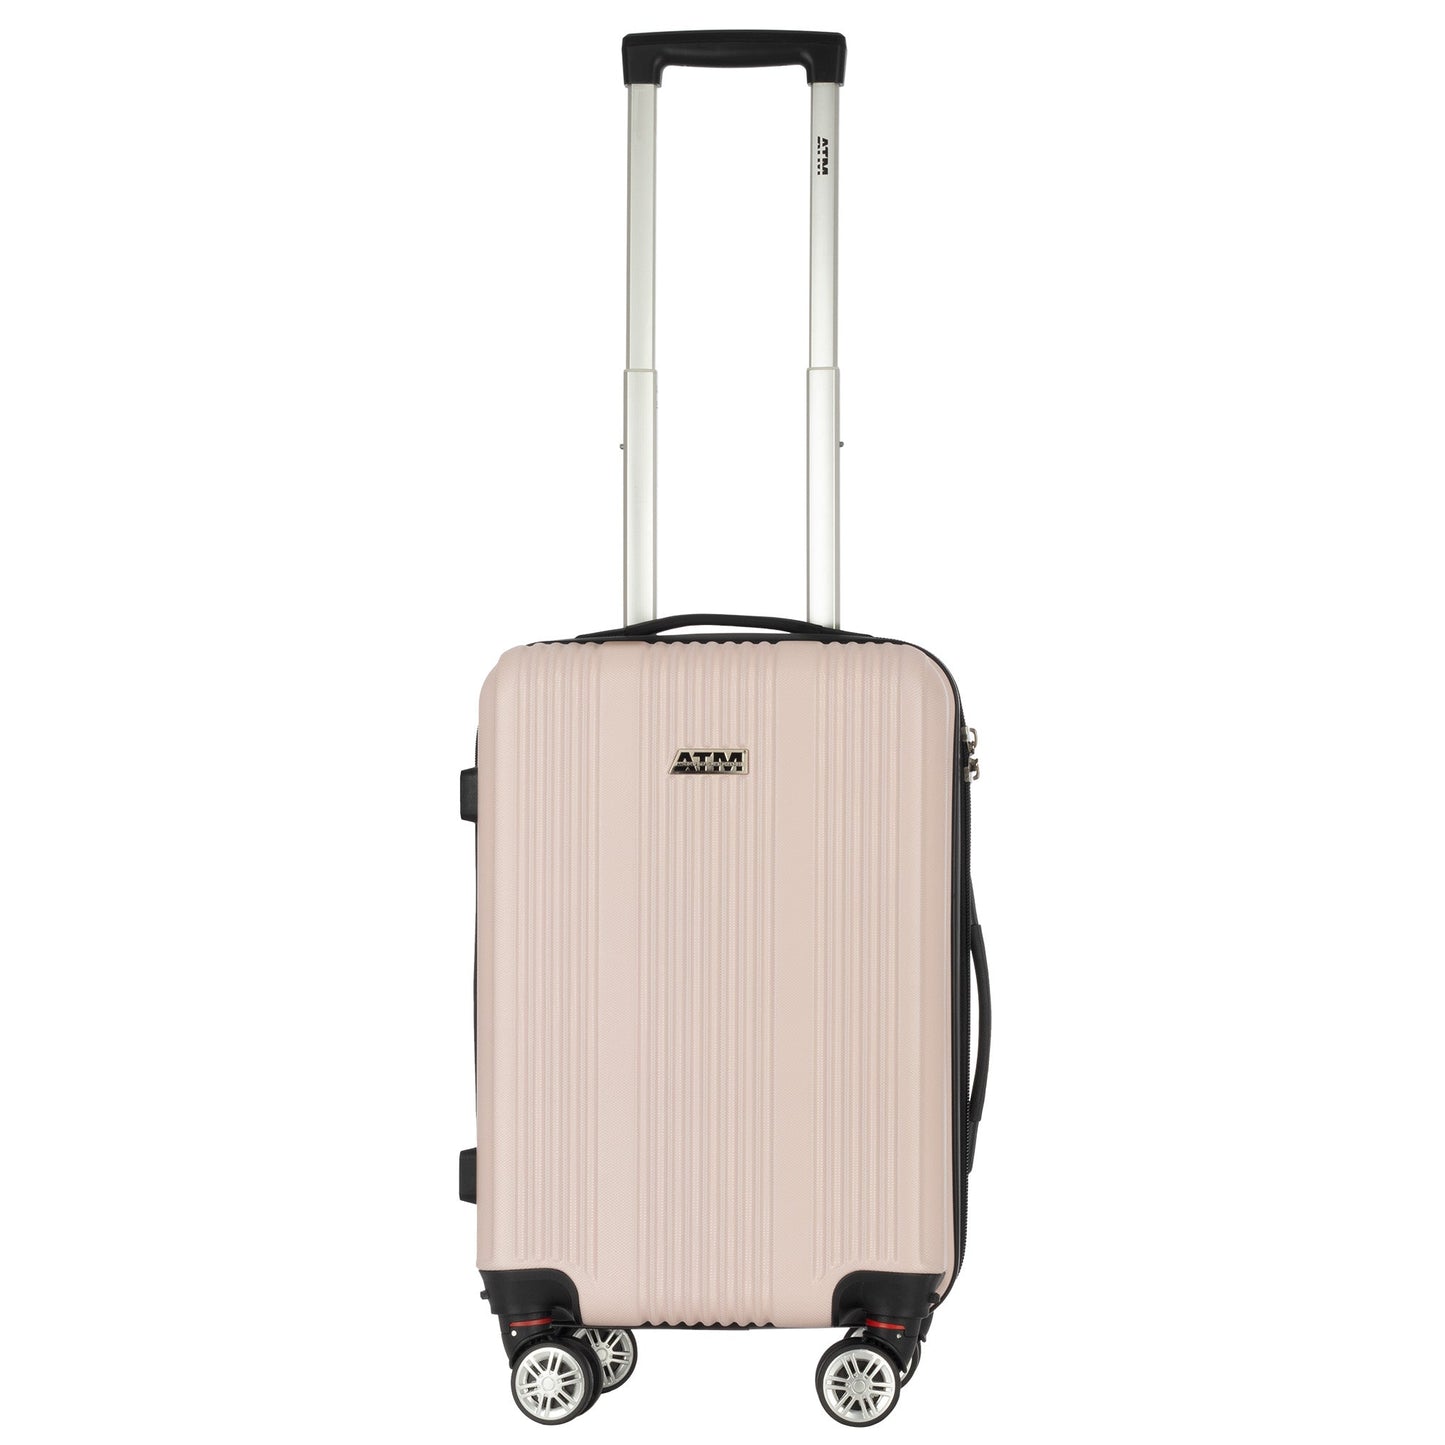 Tactic Collection Pink For Airplane Cabin Luggage 4 Piece Set (18/19/20/21")